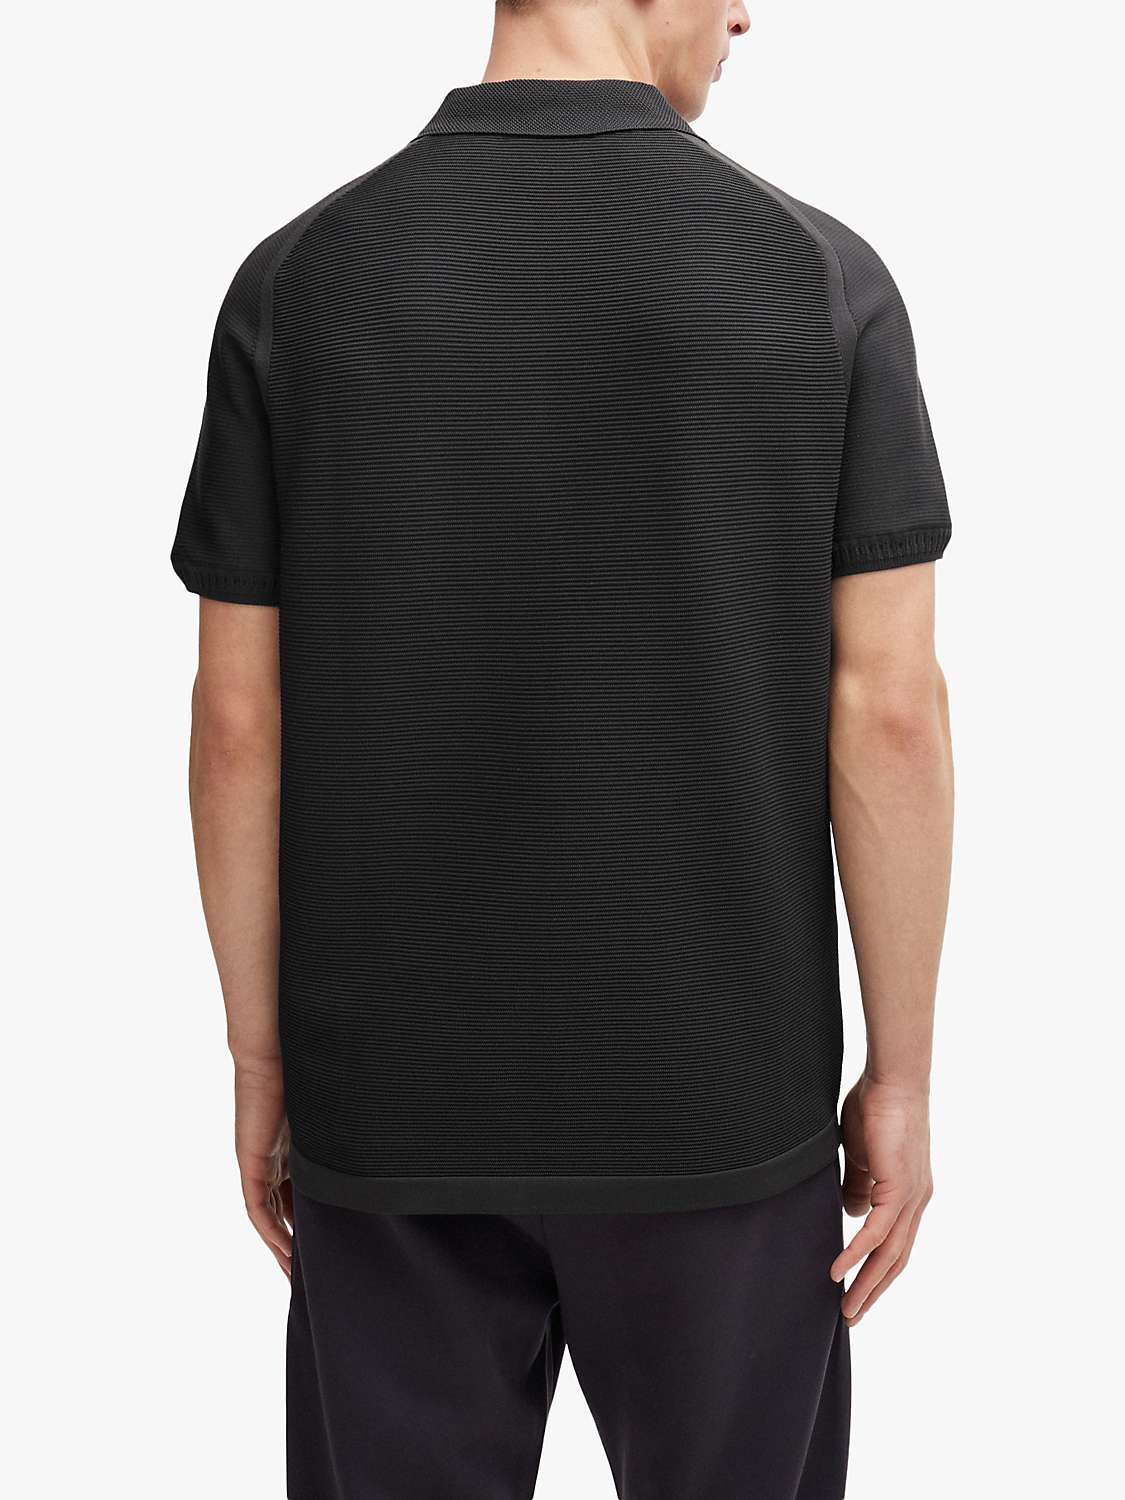 Buy BOSS Zayno 016 Knitted Collar Top, Charcoal Online at johnlewis.com